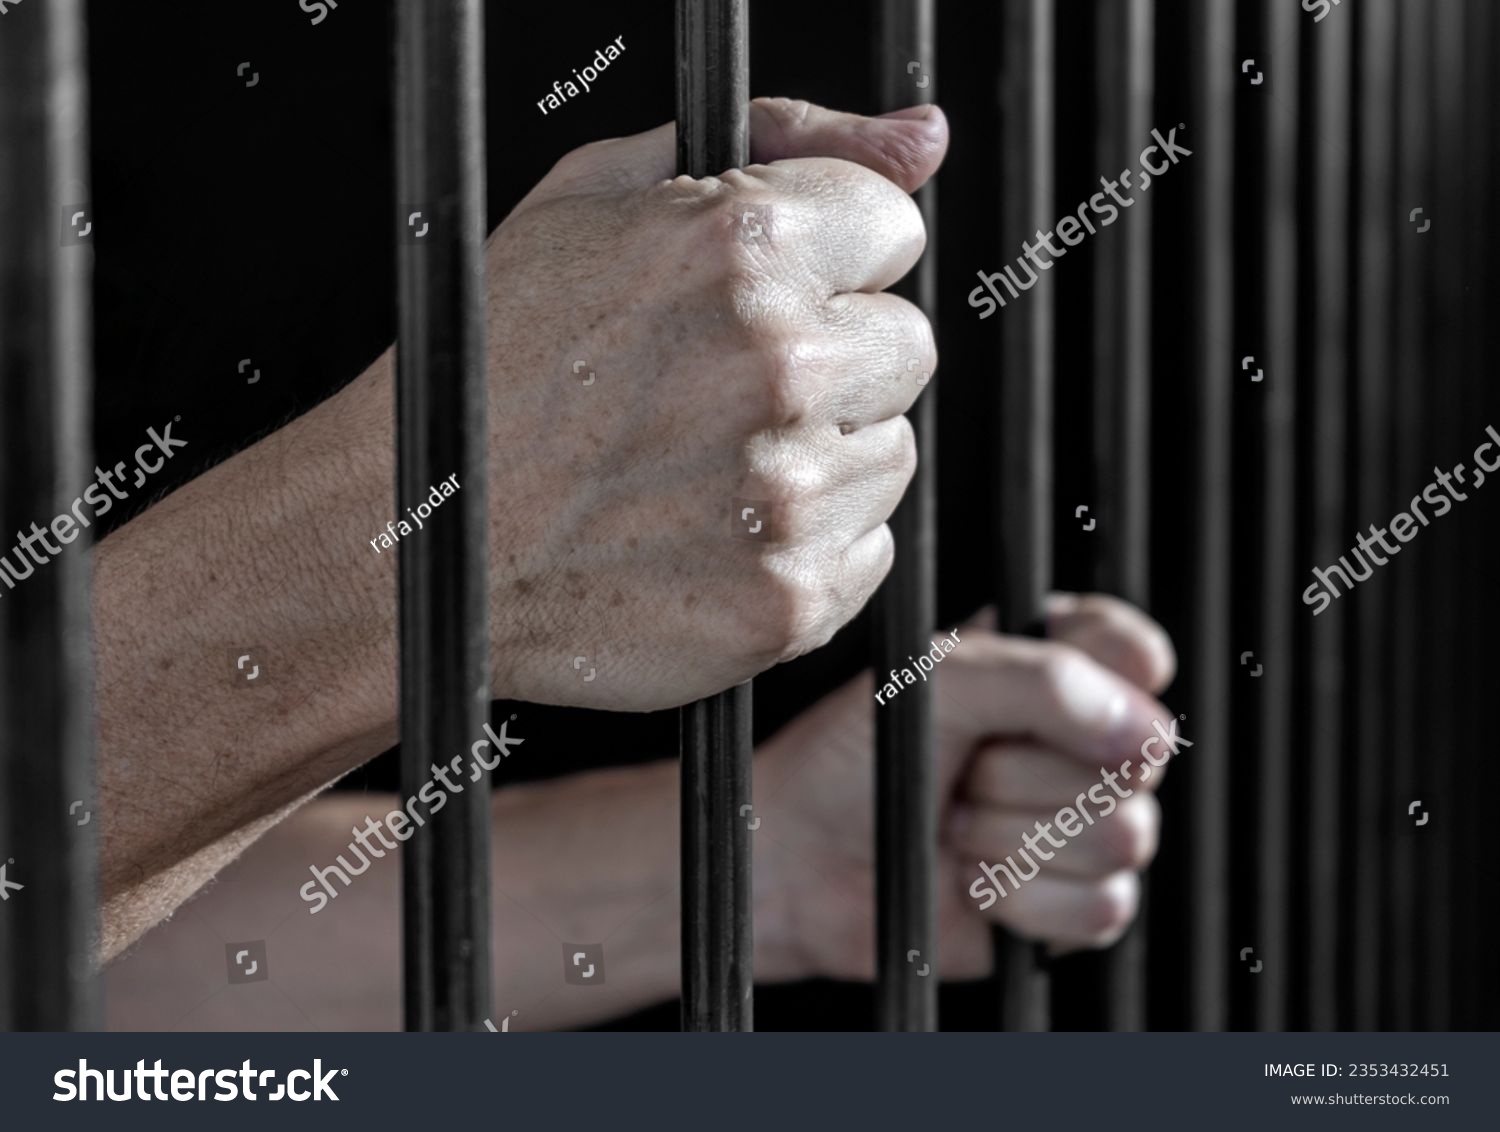 Prisoner's hands gripping the bars of a cell in jail or prison serving sentence. #2353432451